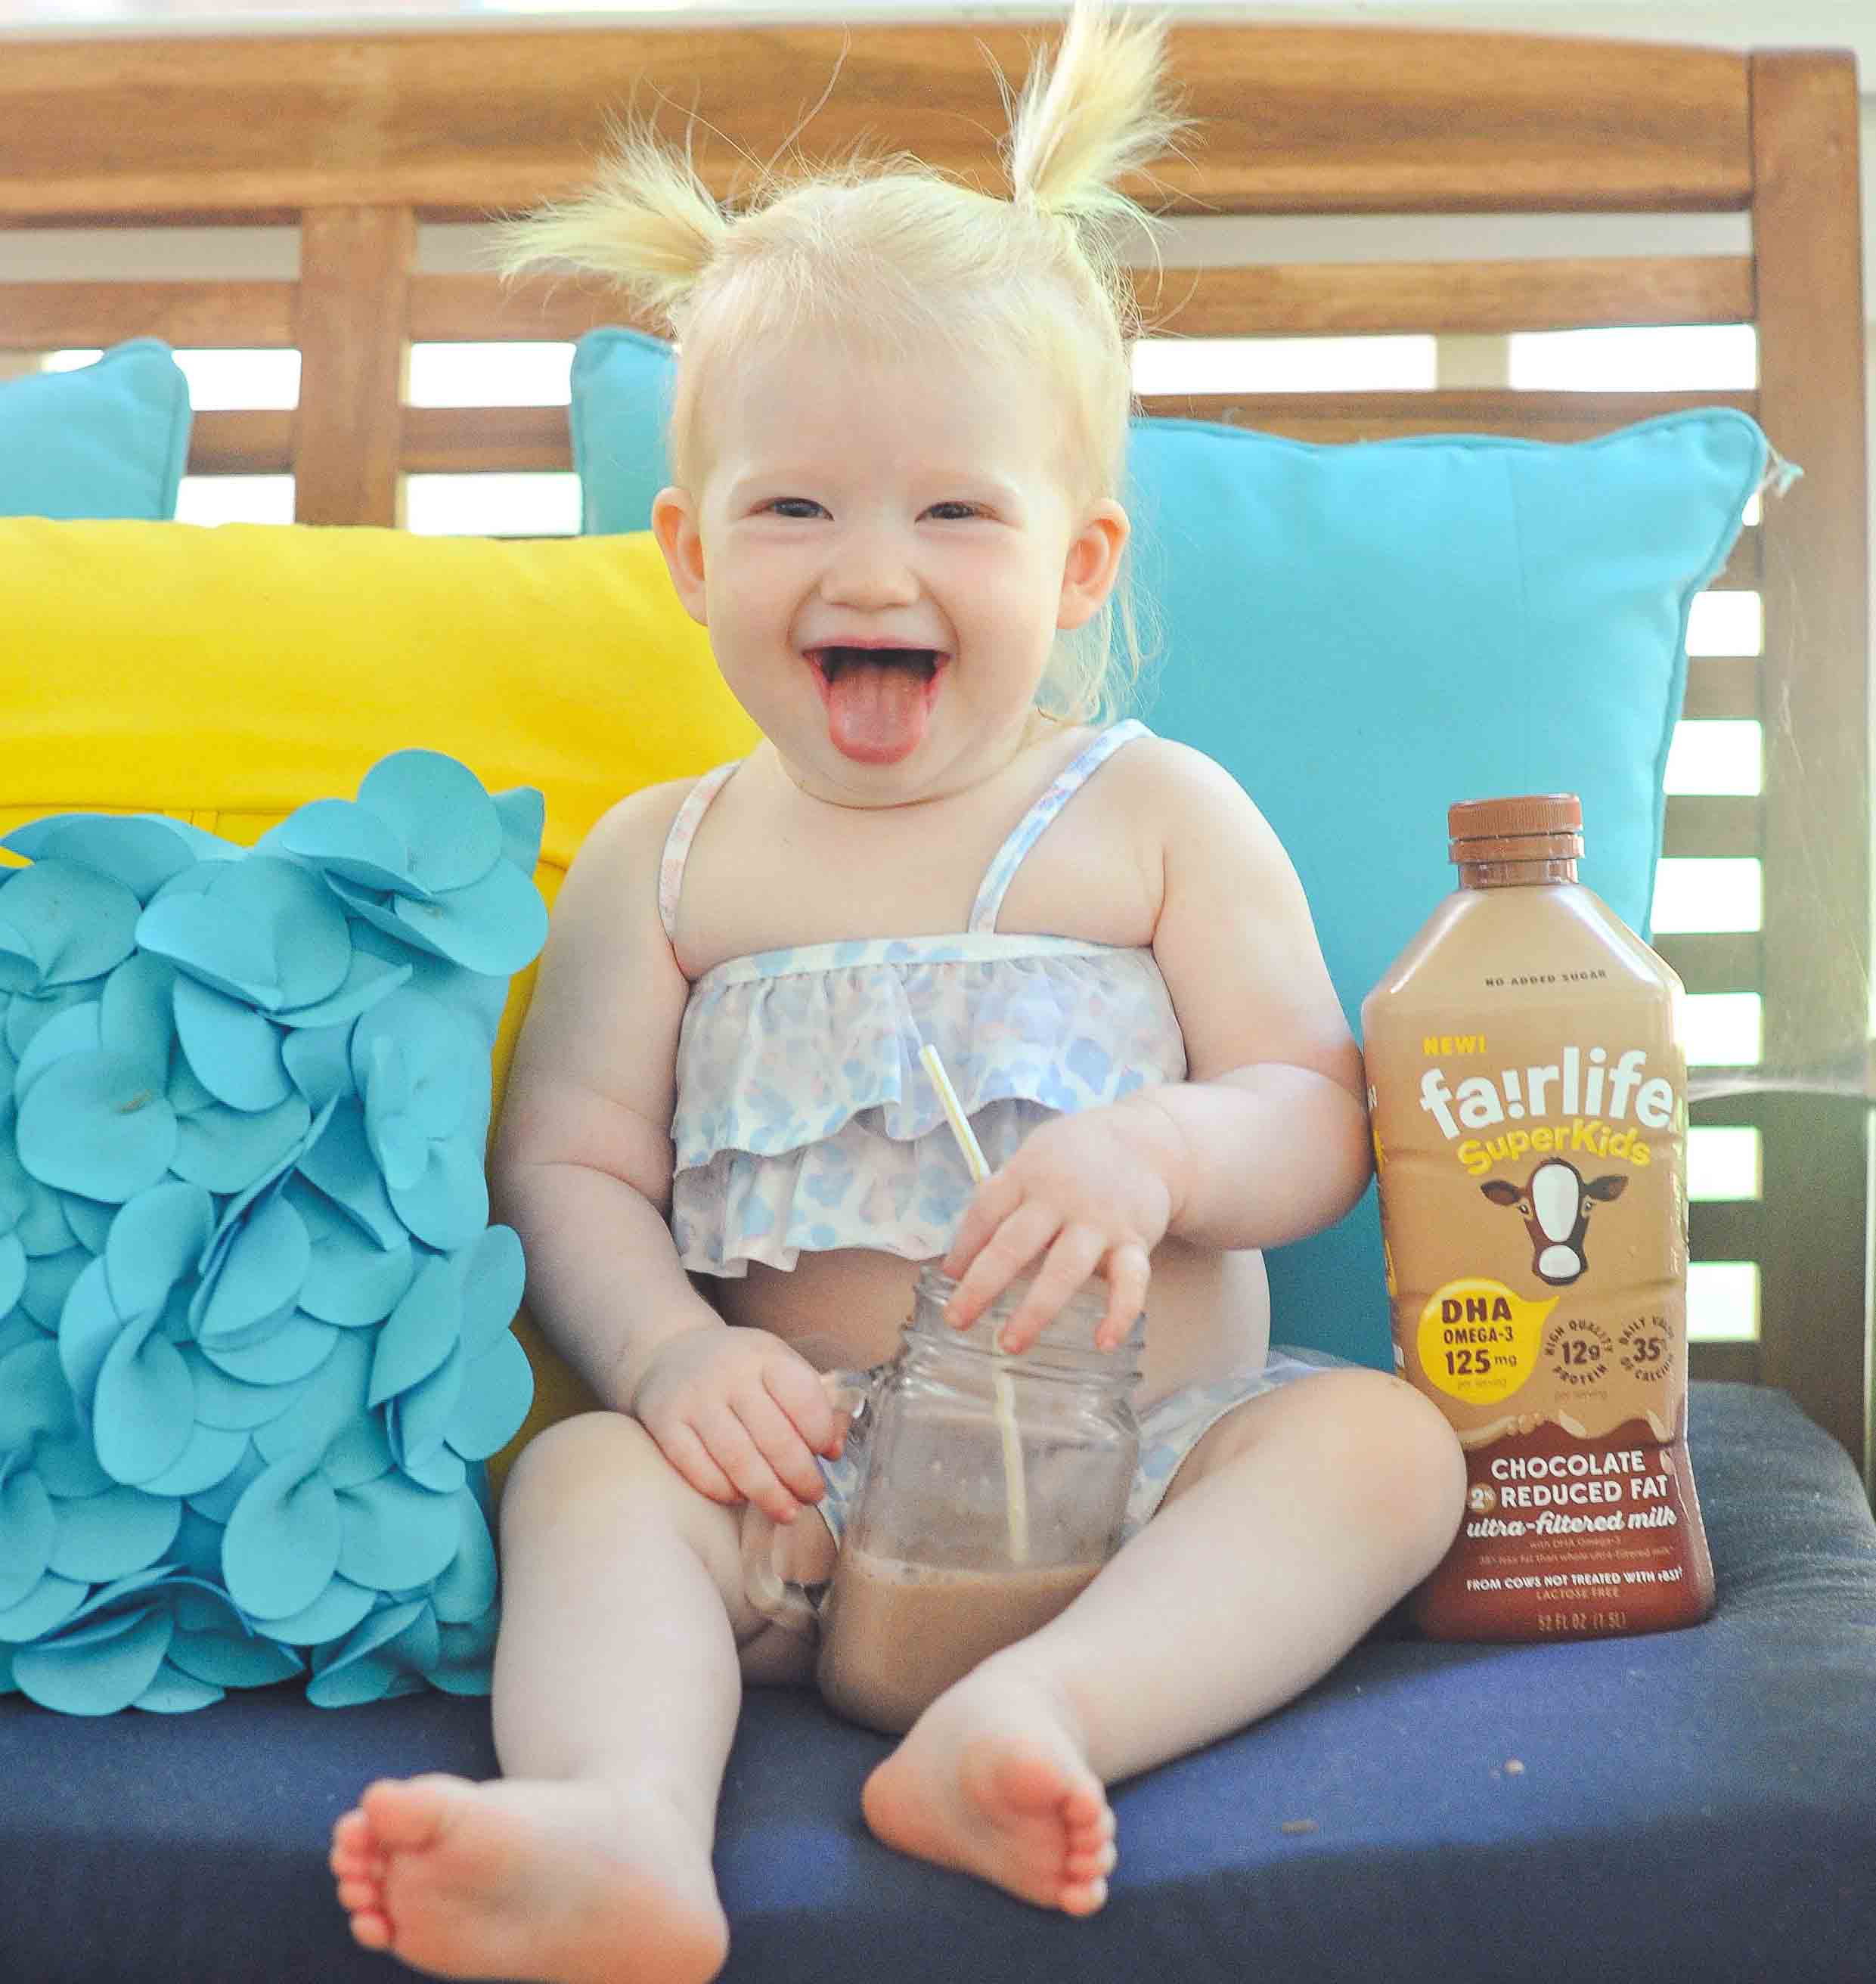 fairlife SuperKids Ultra Filtered Milk and Why We Love It by Atlanta blogger Jessica of Happily Hughes